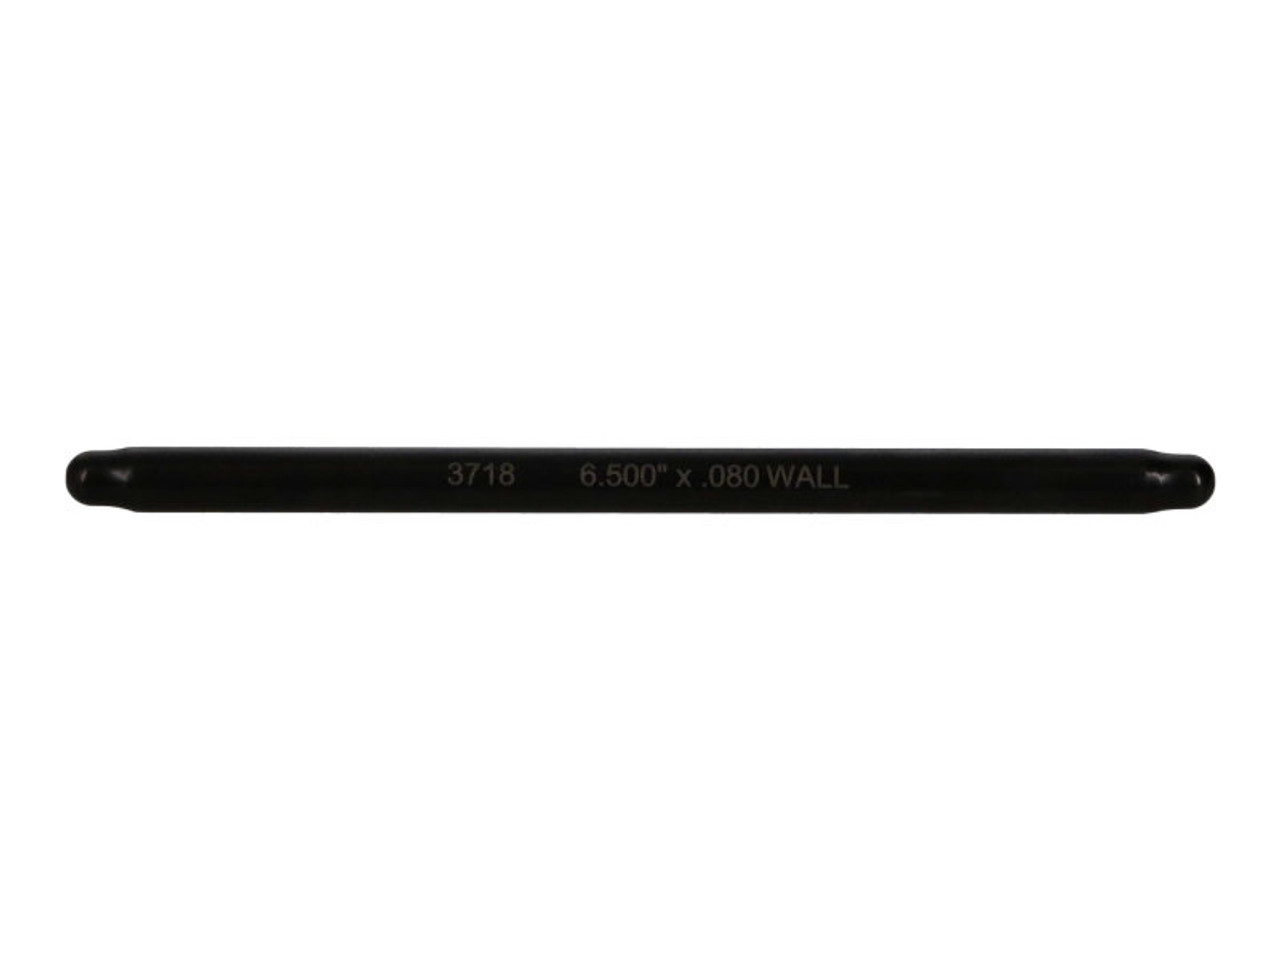 Manley Swedged End Pushrods .135in. Wall 8.650in. Length 4130 Chrome Moly (Set Of 8) - 25352-8 Photo - Primary